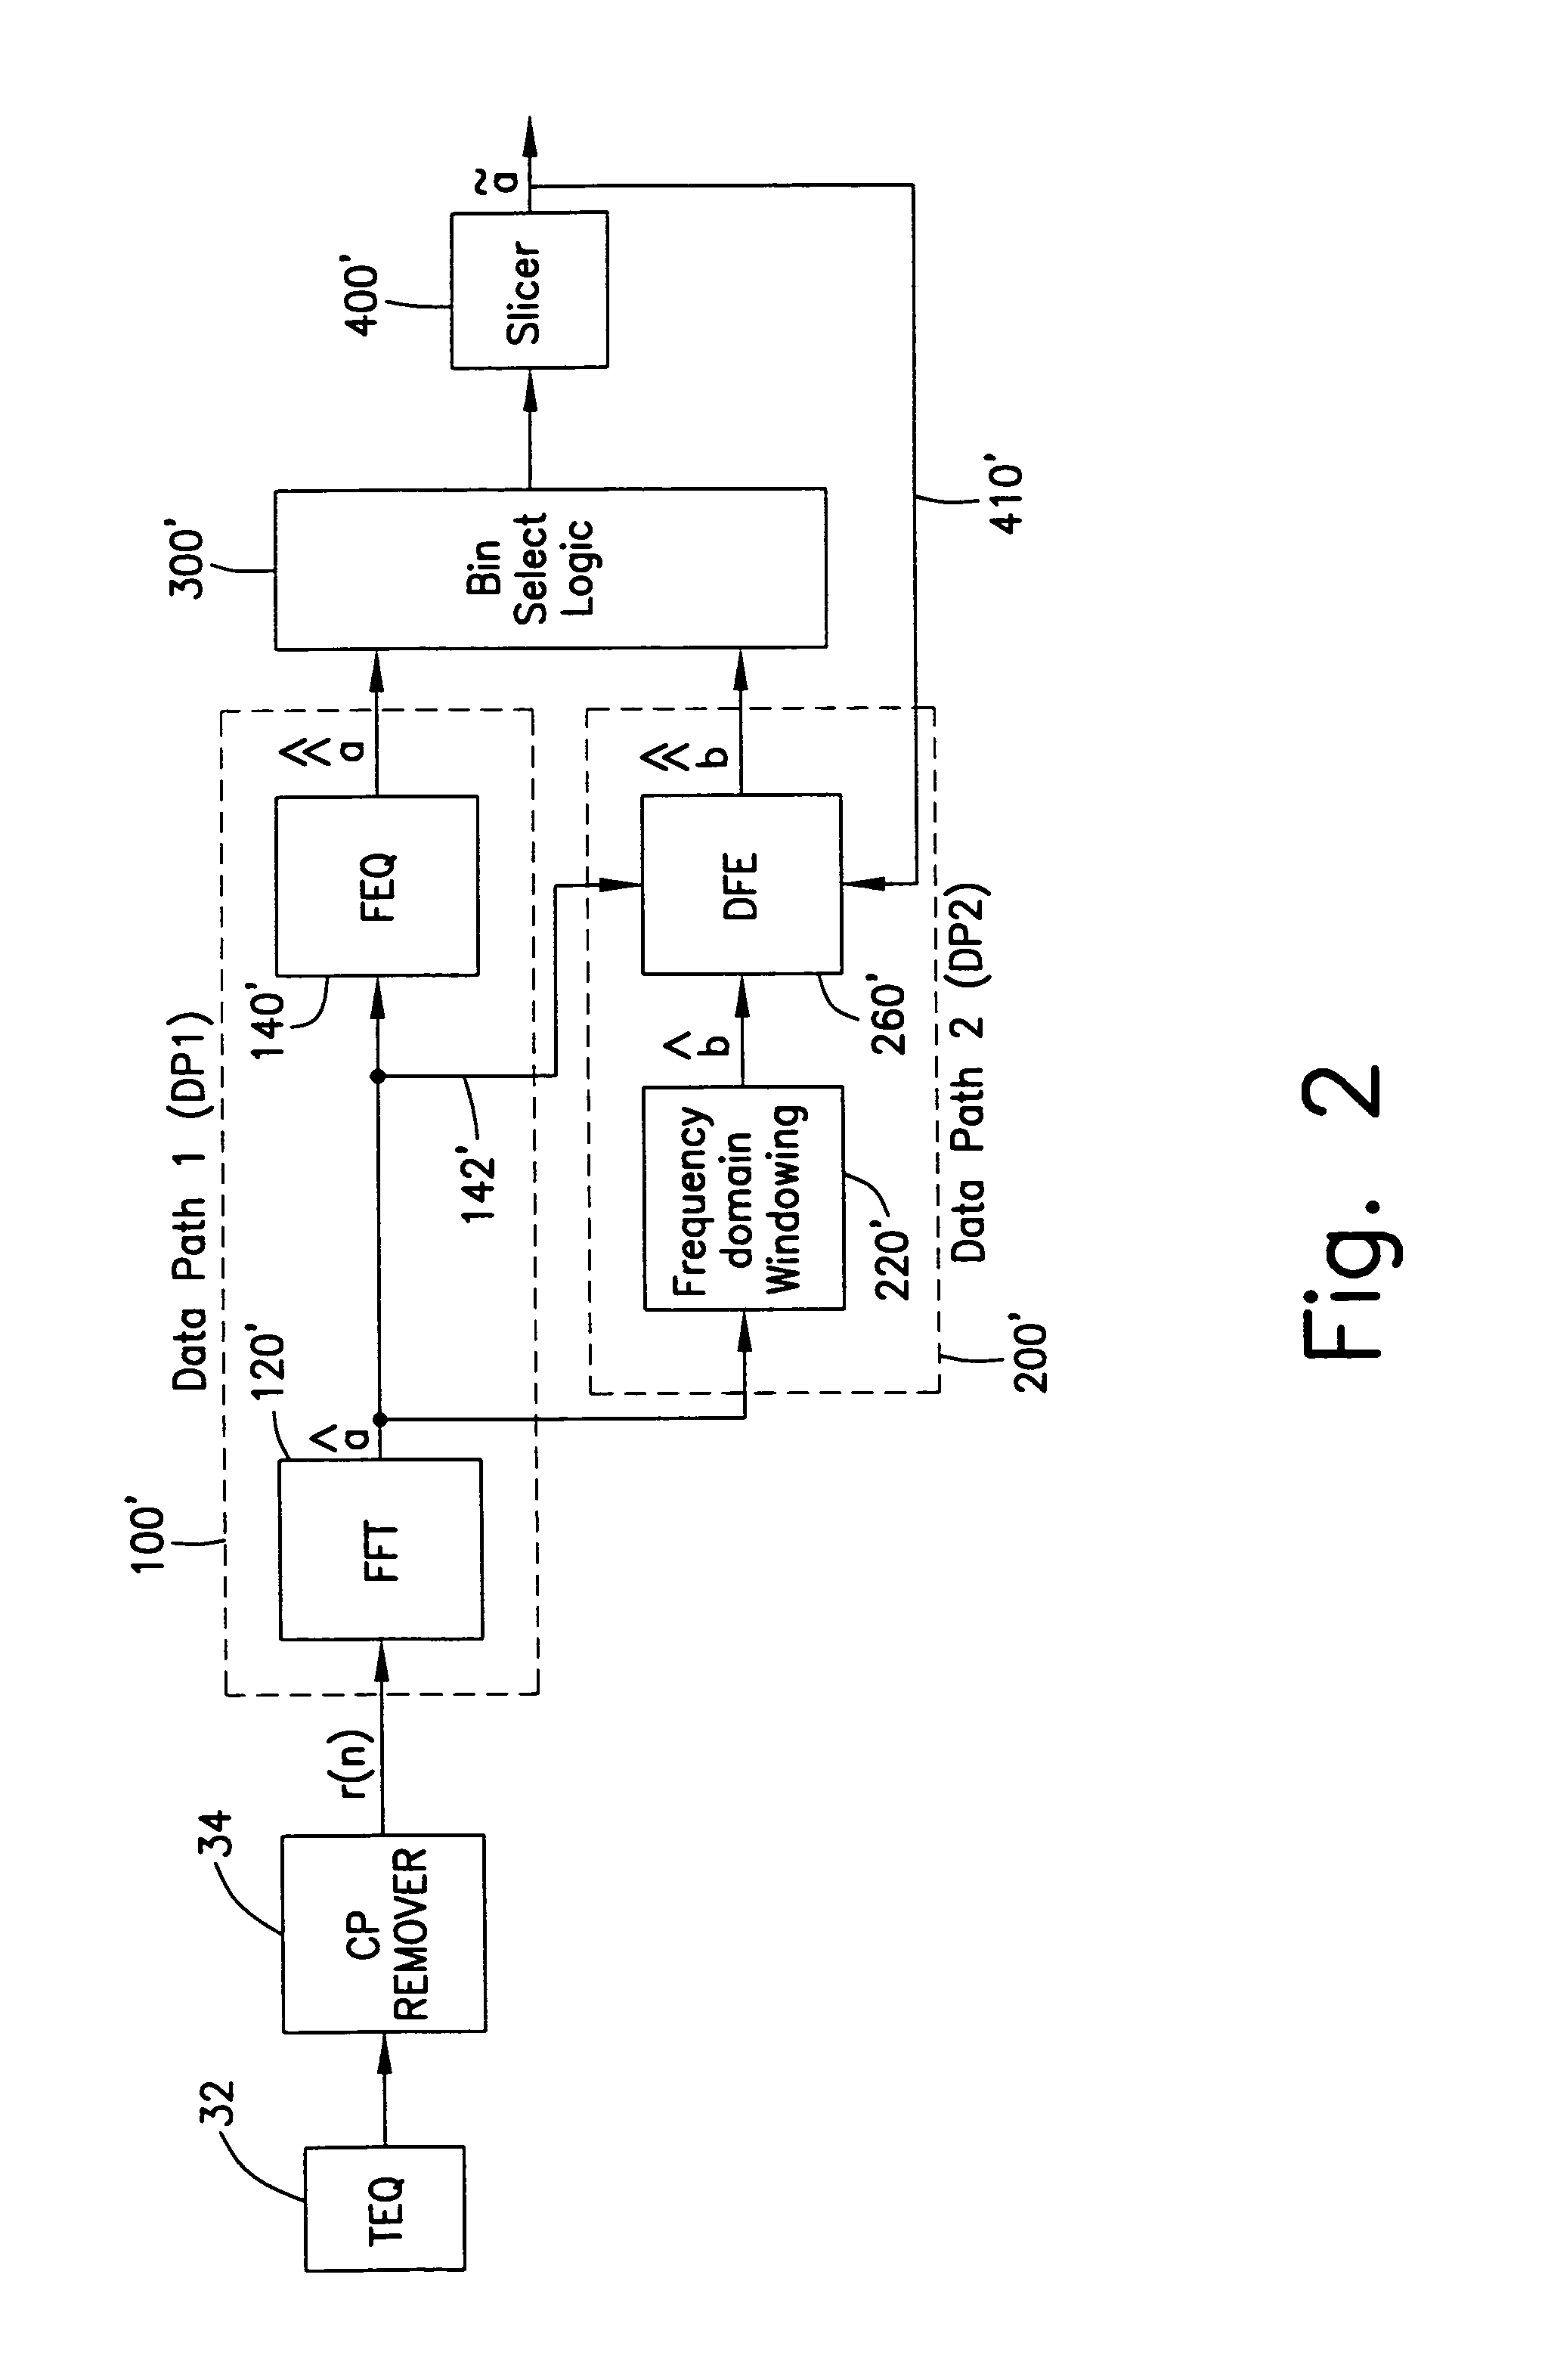 Receiver for discrete multitone modulated signals having window function